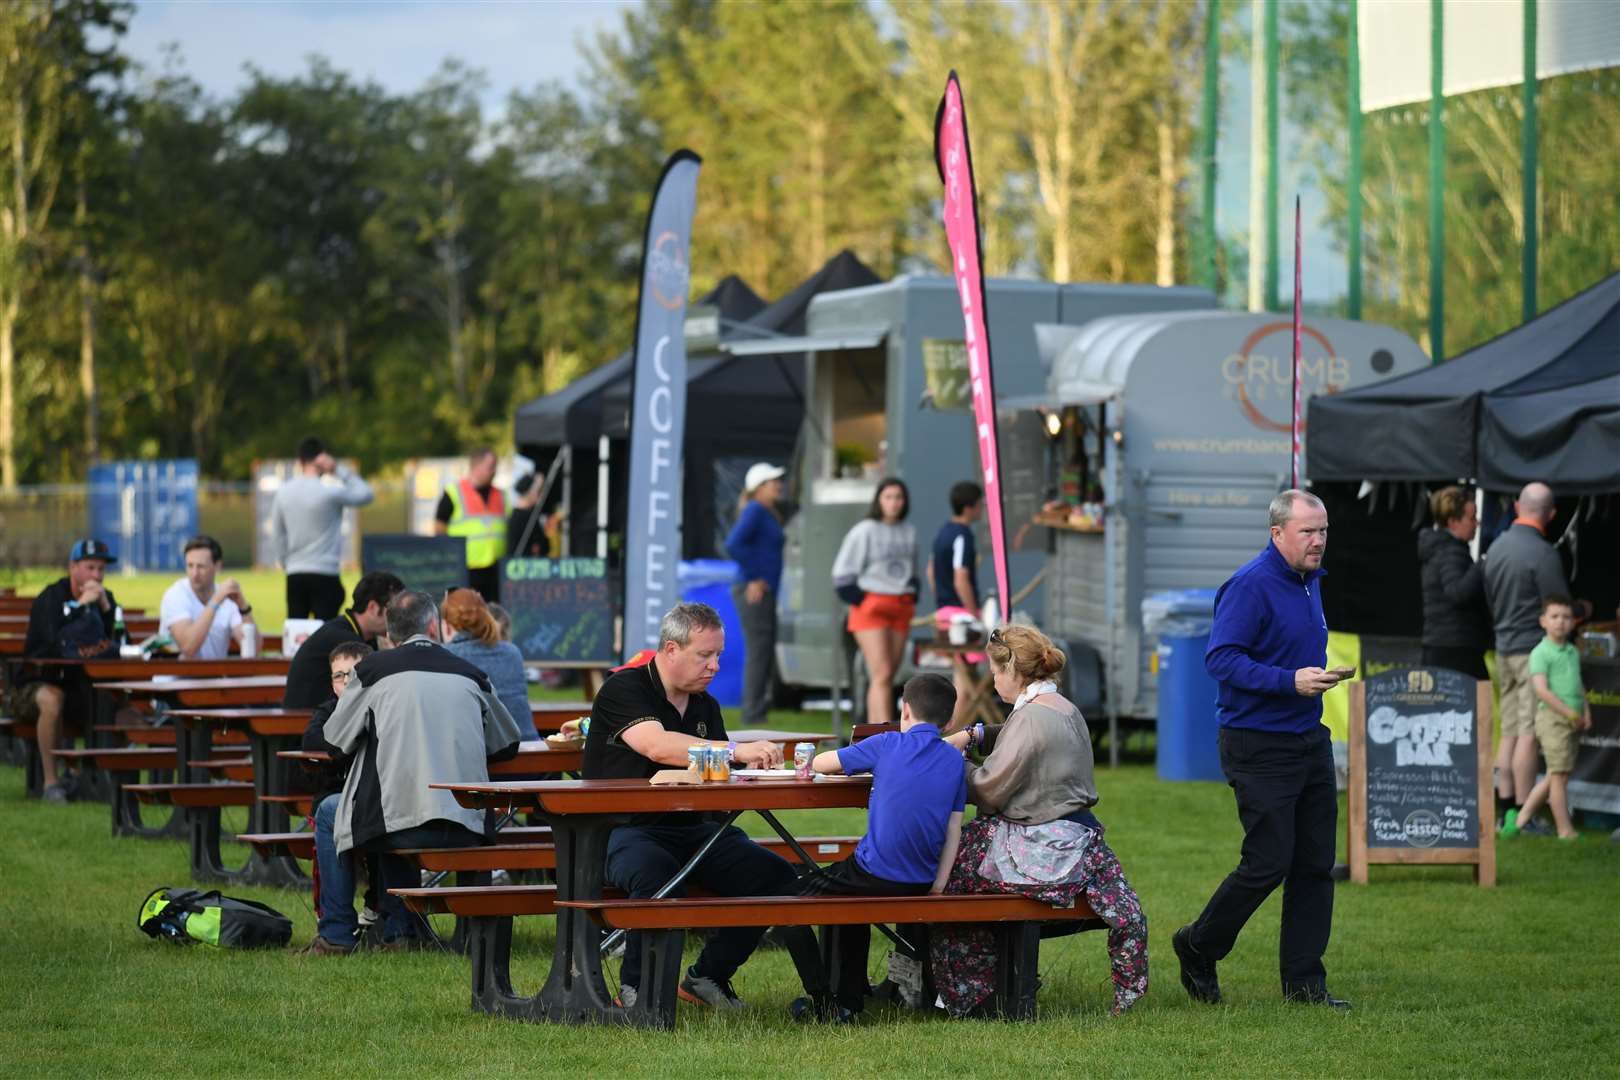 The Open Camping Village will feature food and drink outlets and entertainment Picture: Caboose & Co